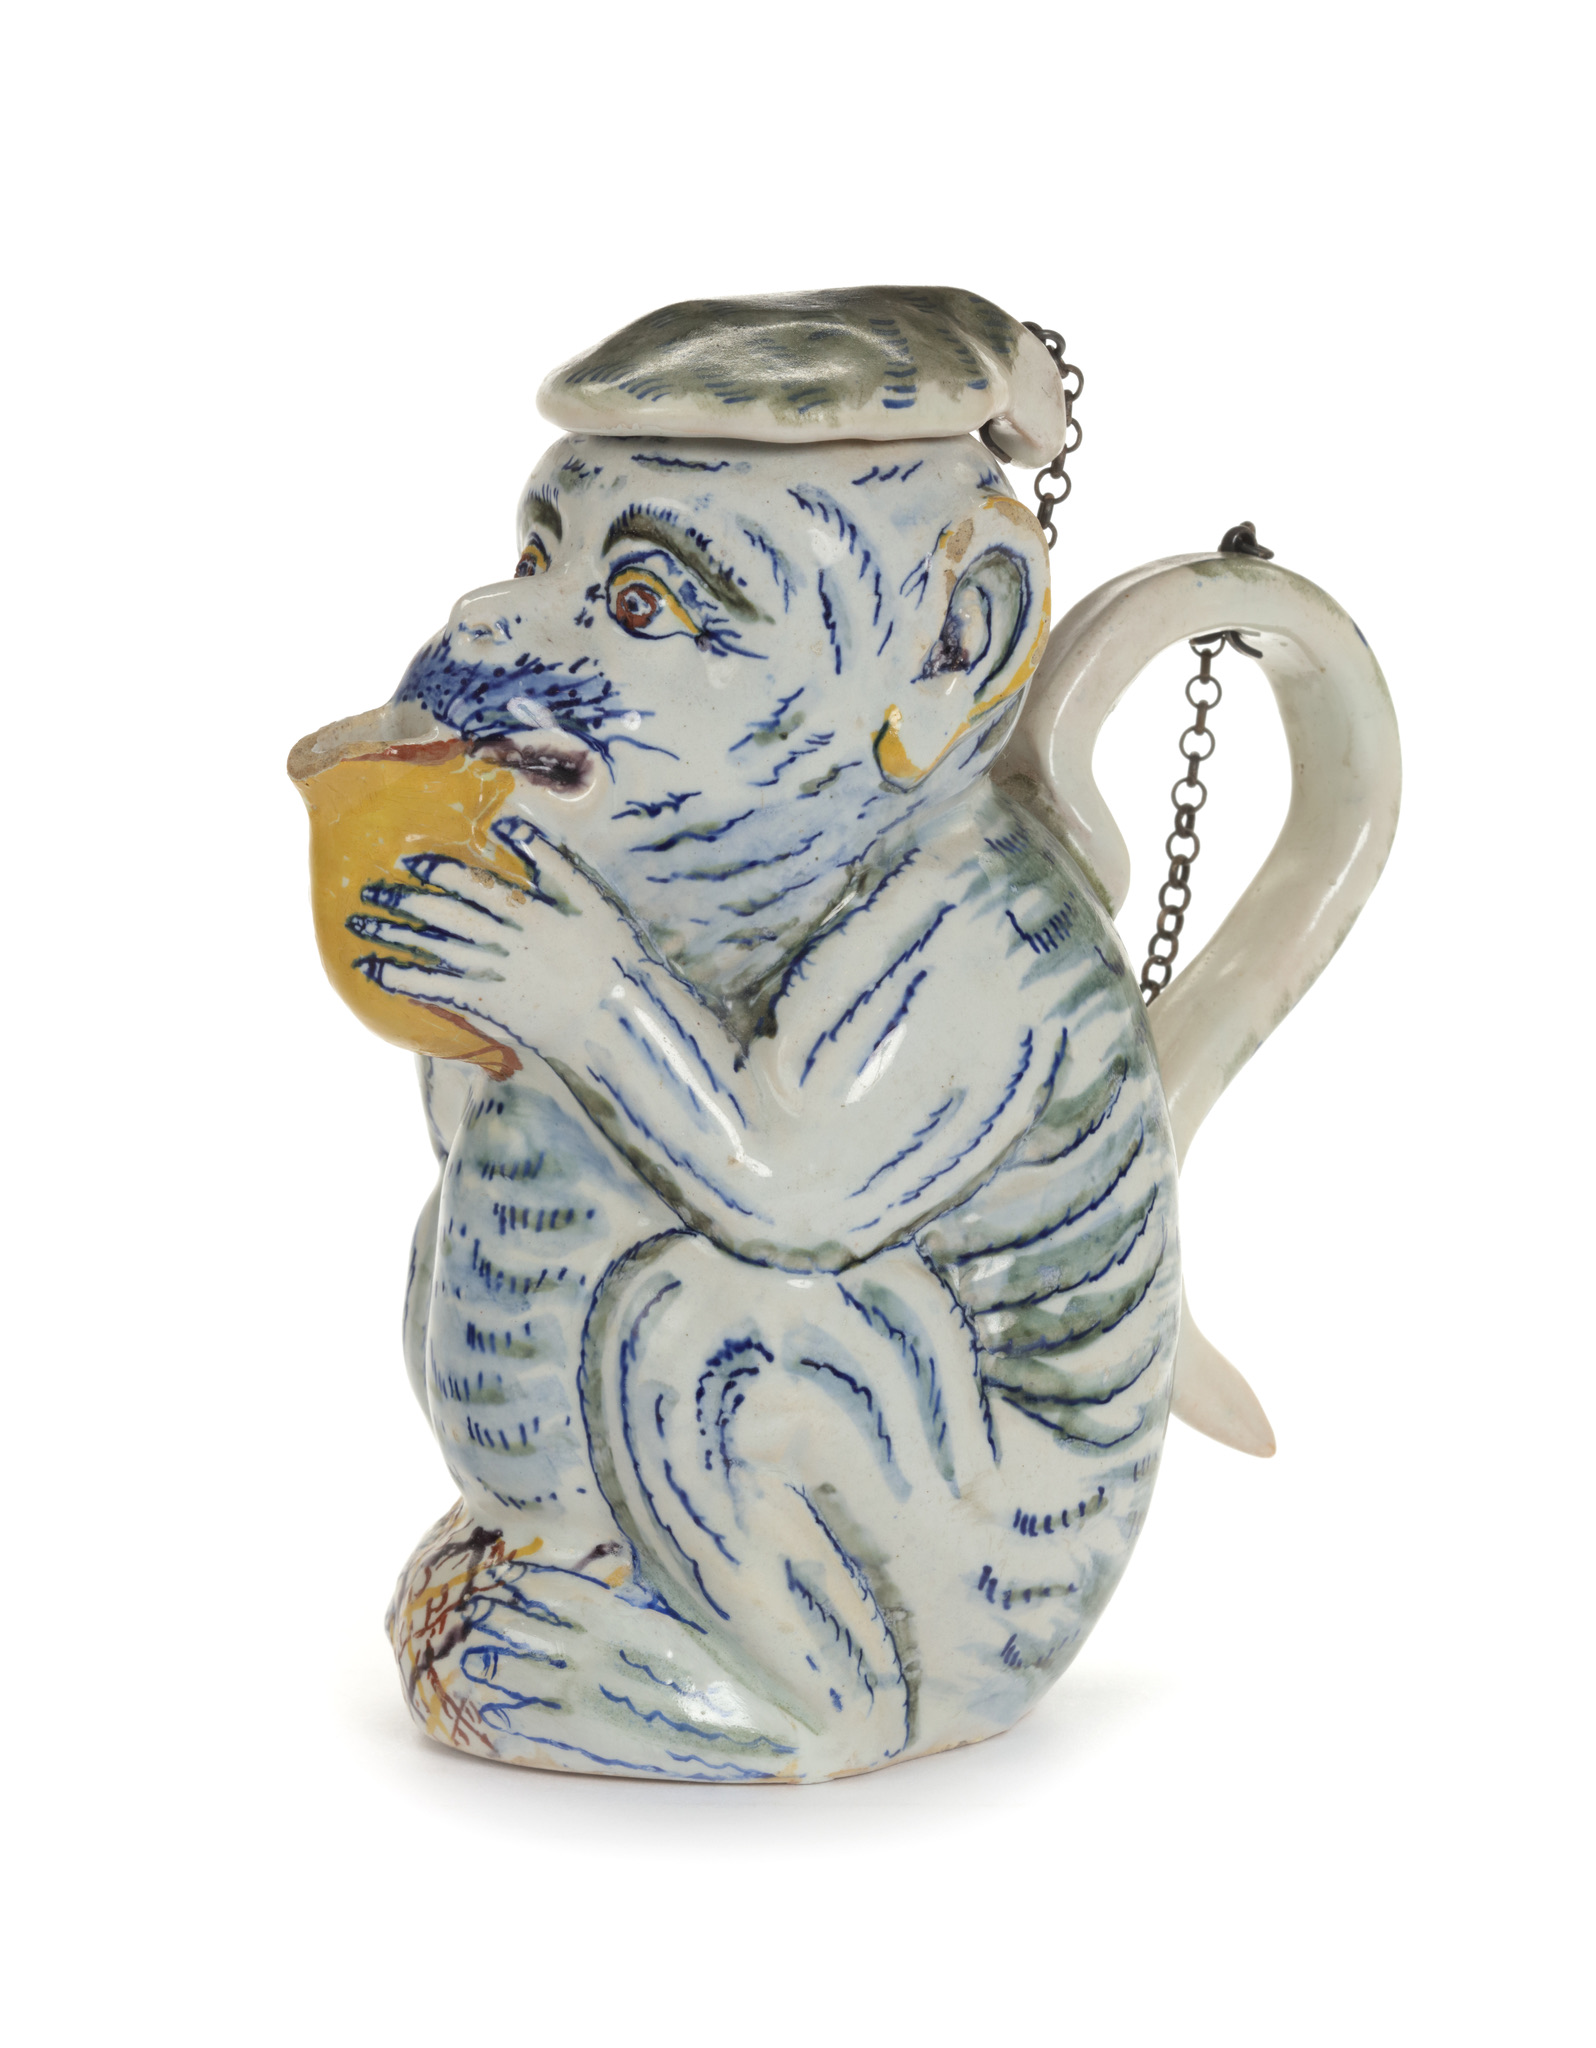 D2345. Polychrome Jug in the Form of a Seated Monkey